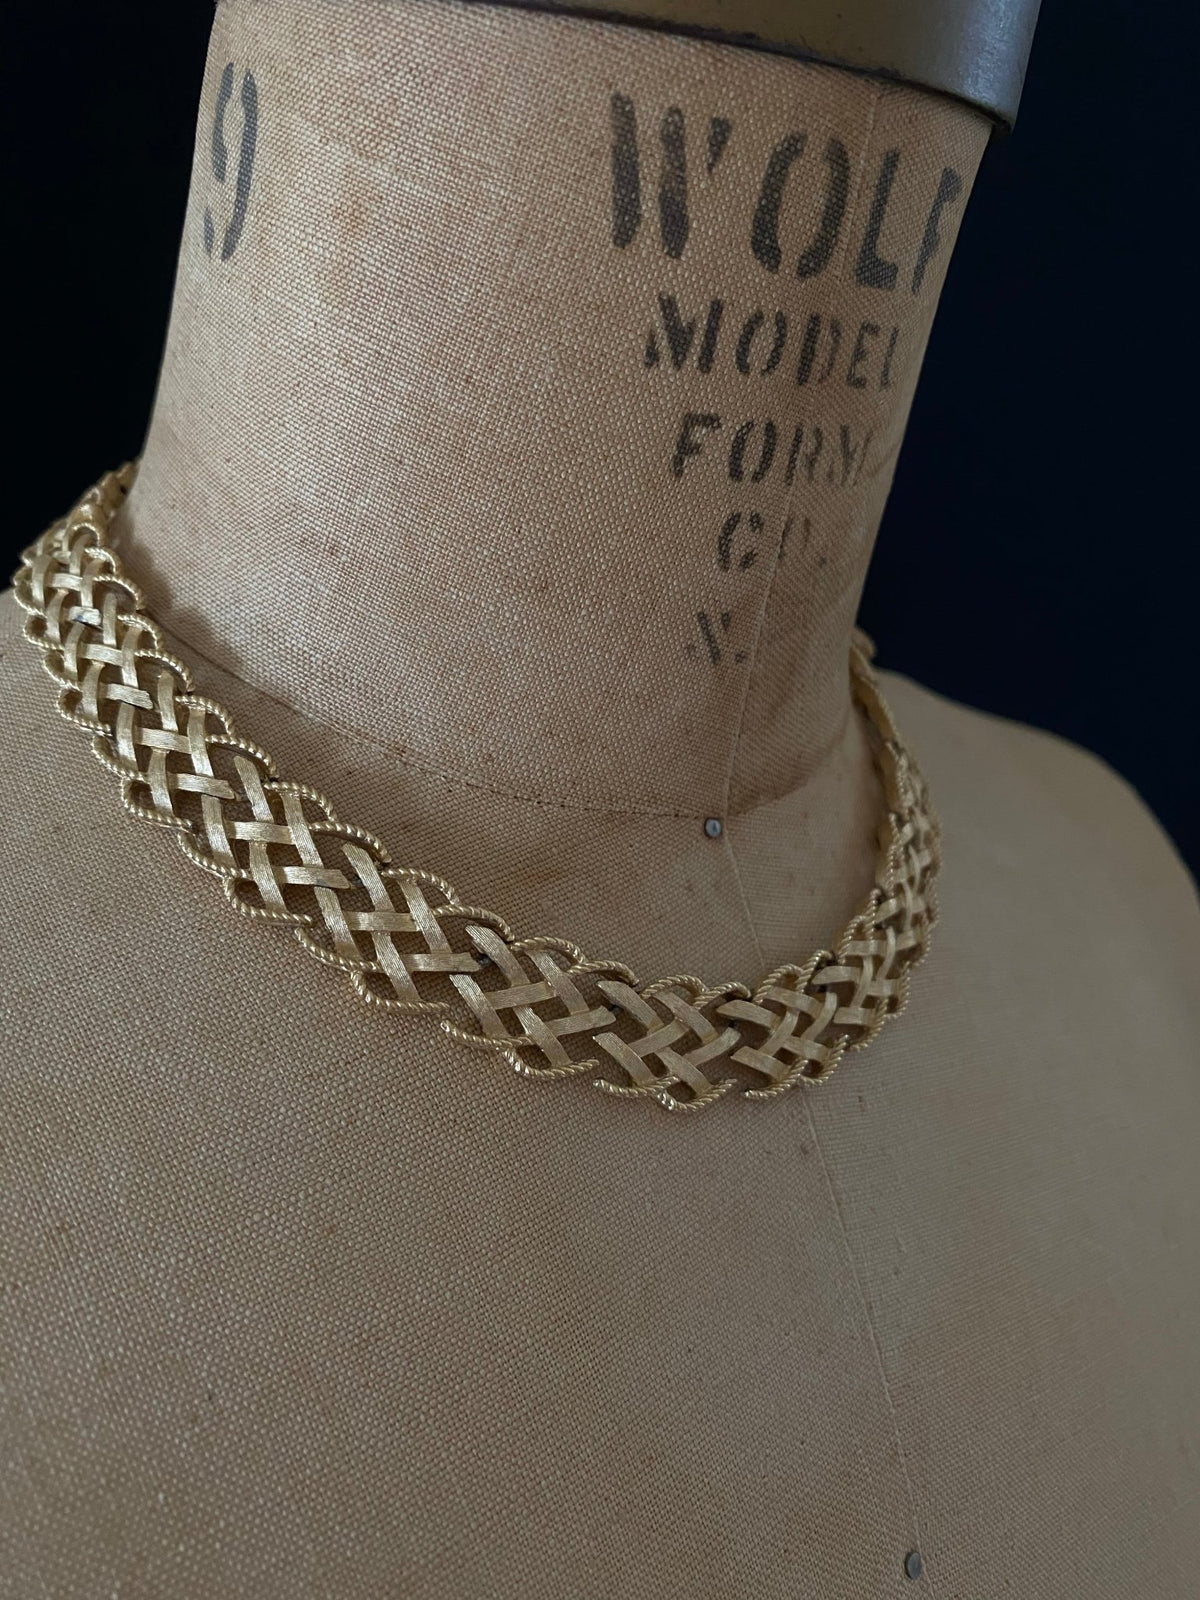 Trifari Vintage Jewelry Gold Basket Weave Link Necklace - 24 Wishes Vintage Jewelry